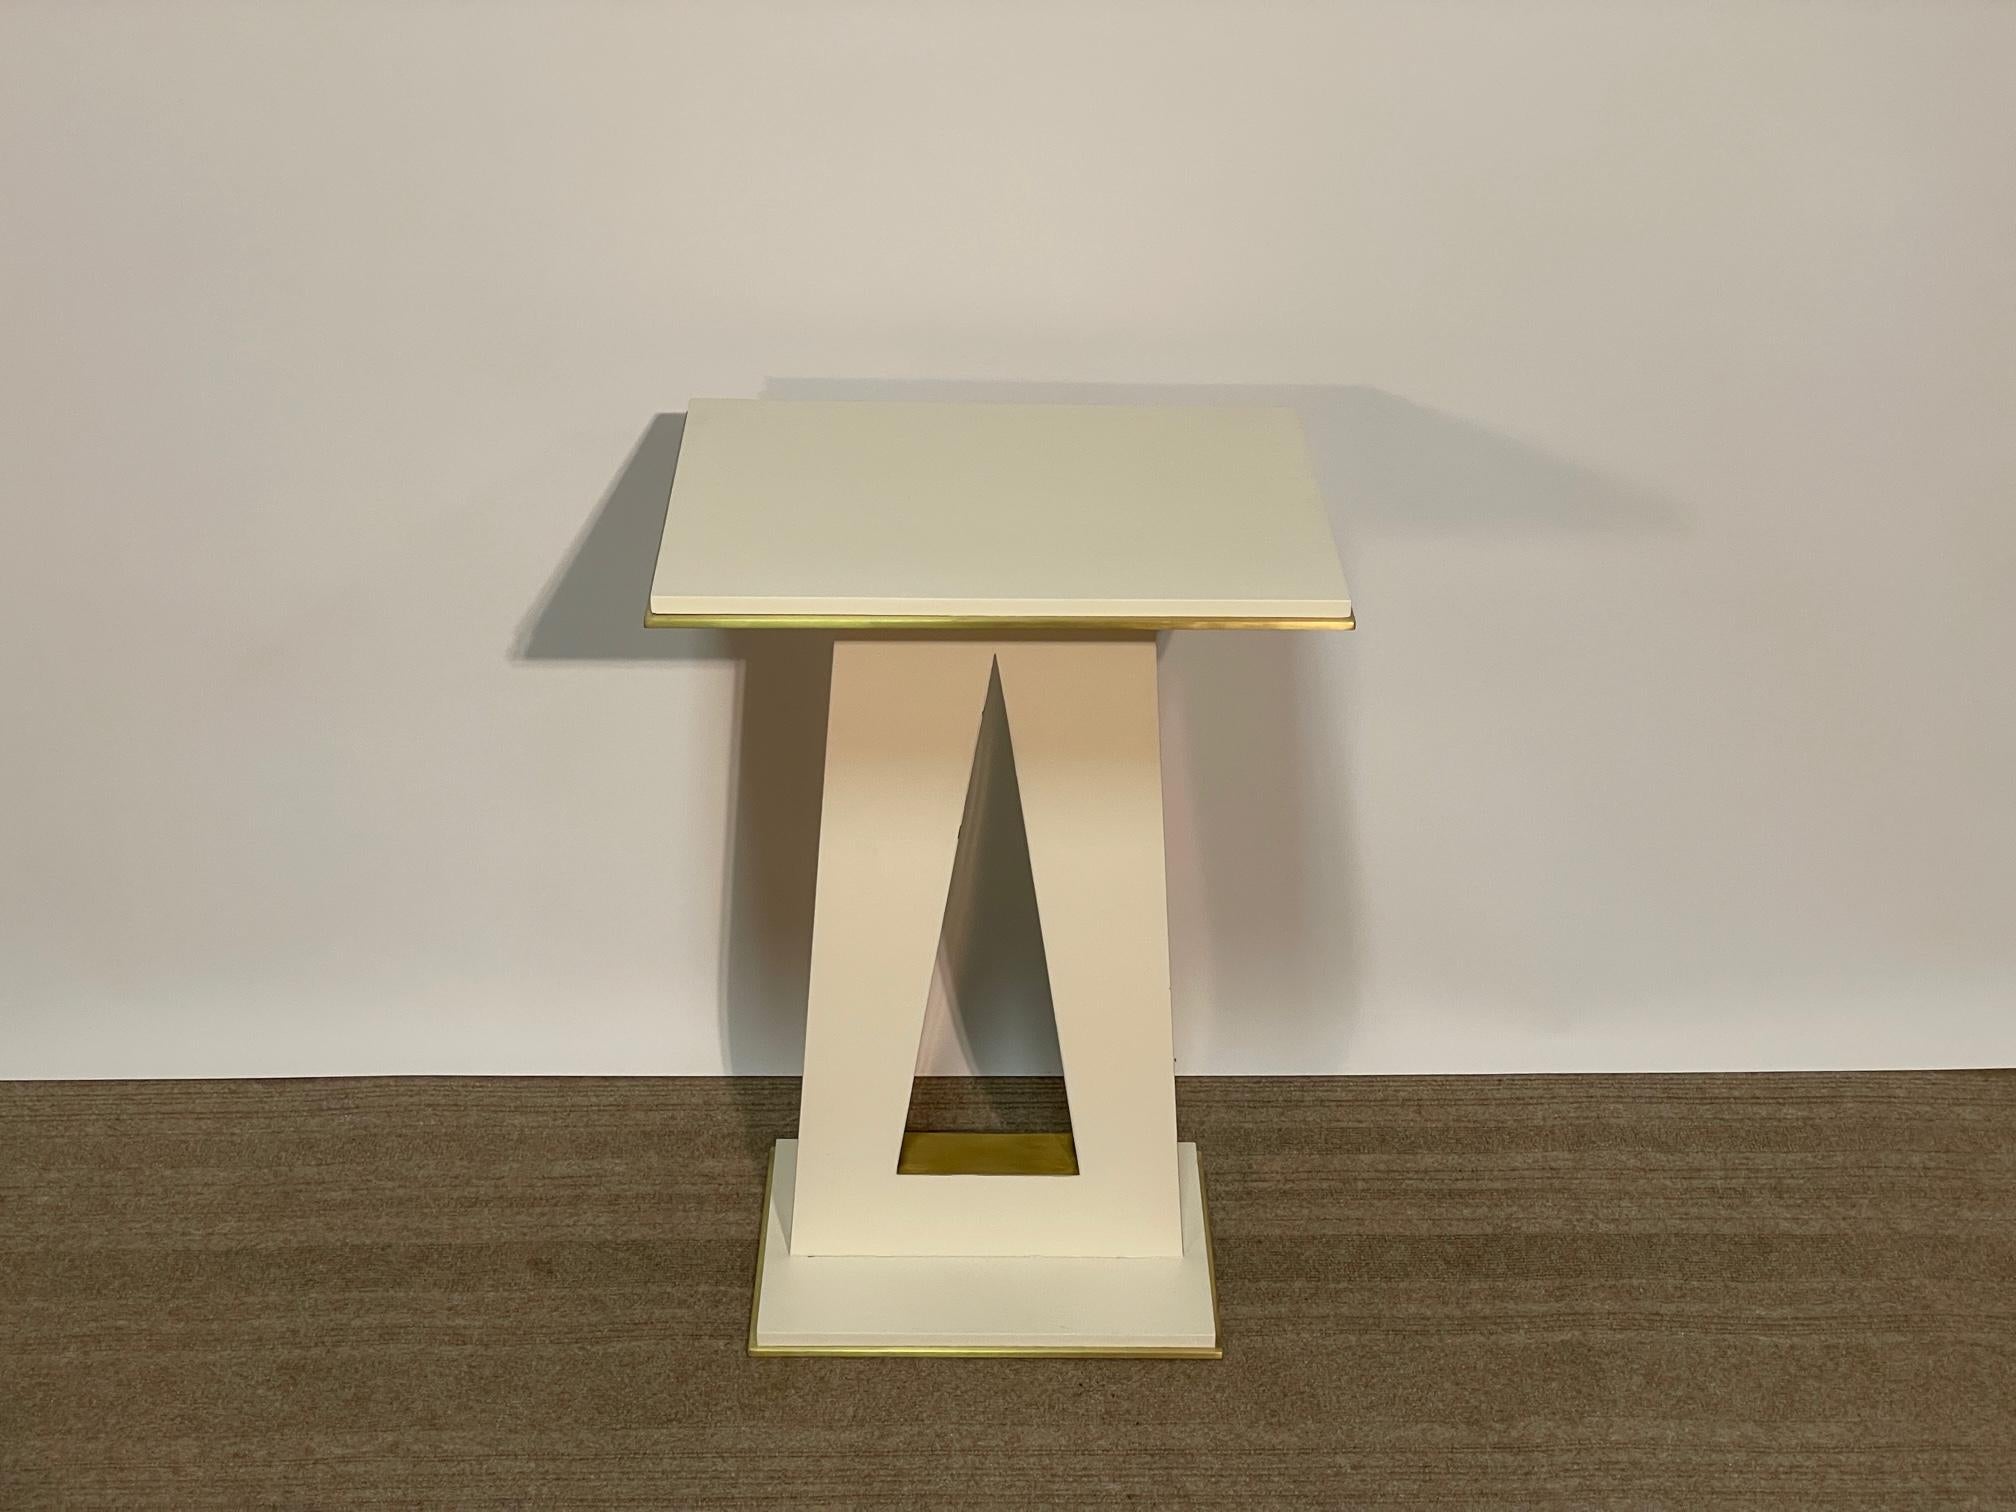 Jean de Merry's Api side table is composed of a wood frame with bronze accents on the base and top and inlay through the center design.  The frame and top are finished in Liso Satin and the bronze in JDM's Light Bronze.  Both tables are identical in